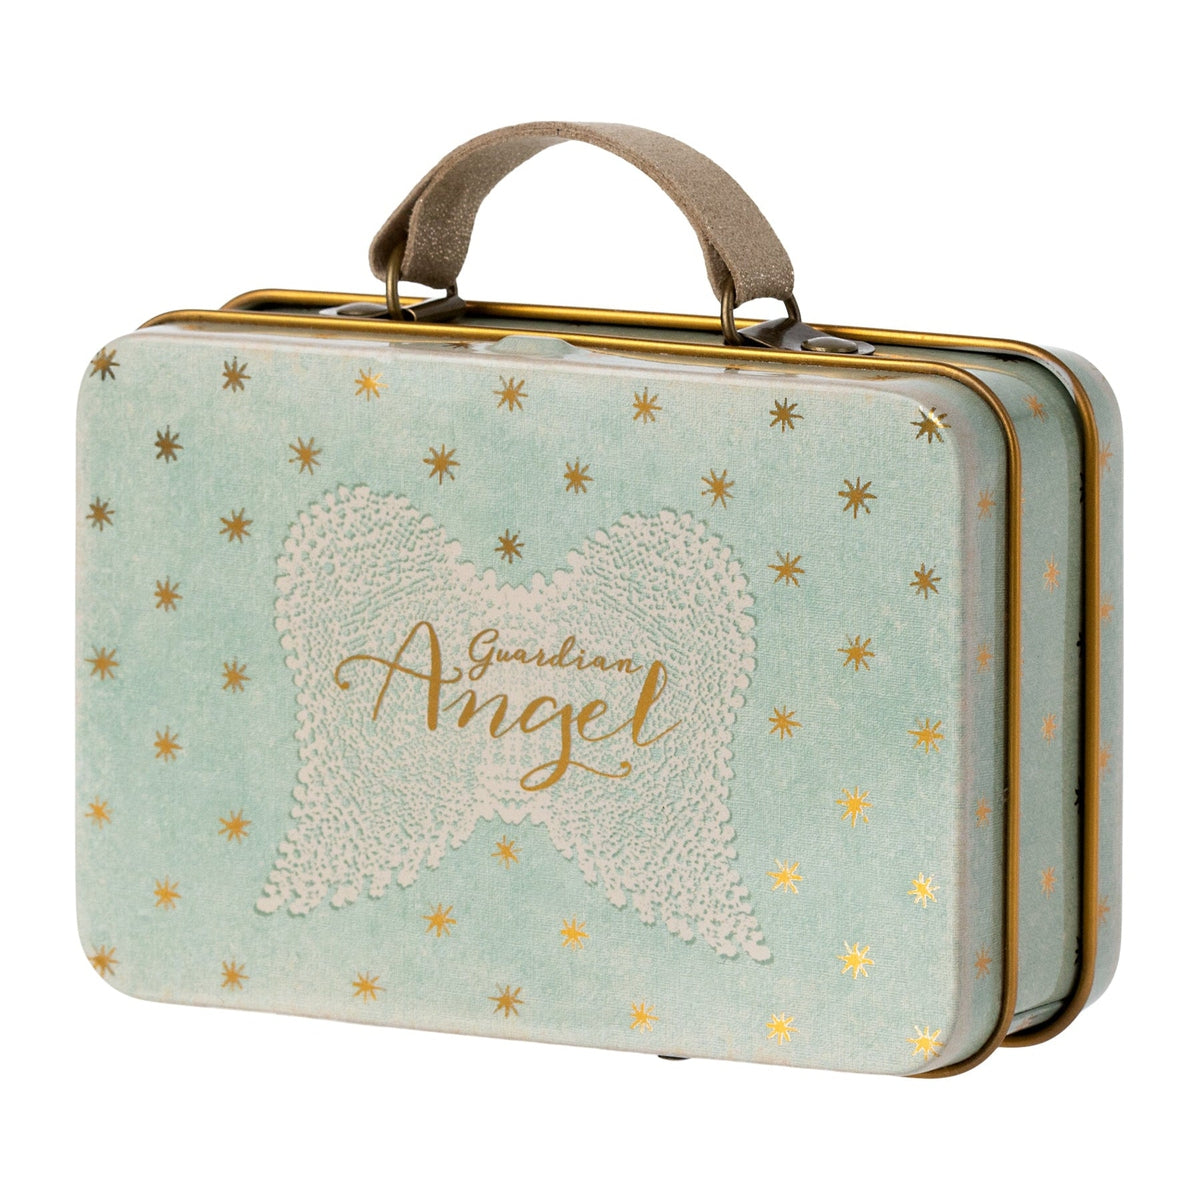 maileg metal suitcase, small angel